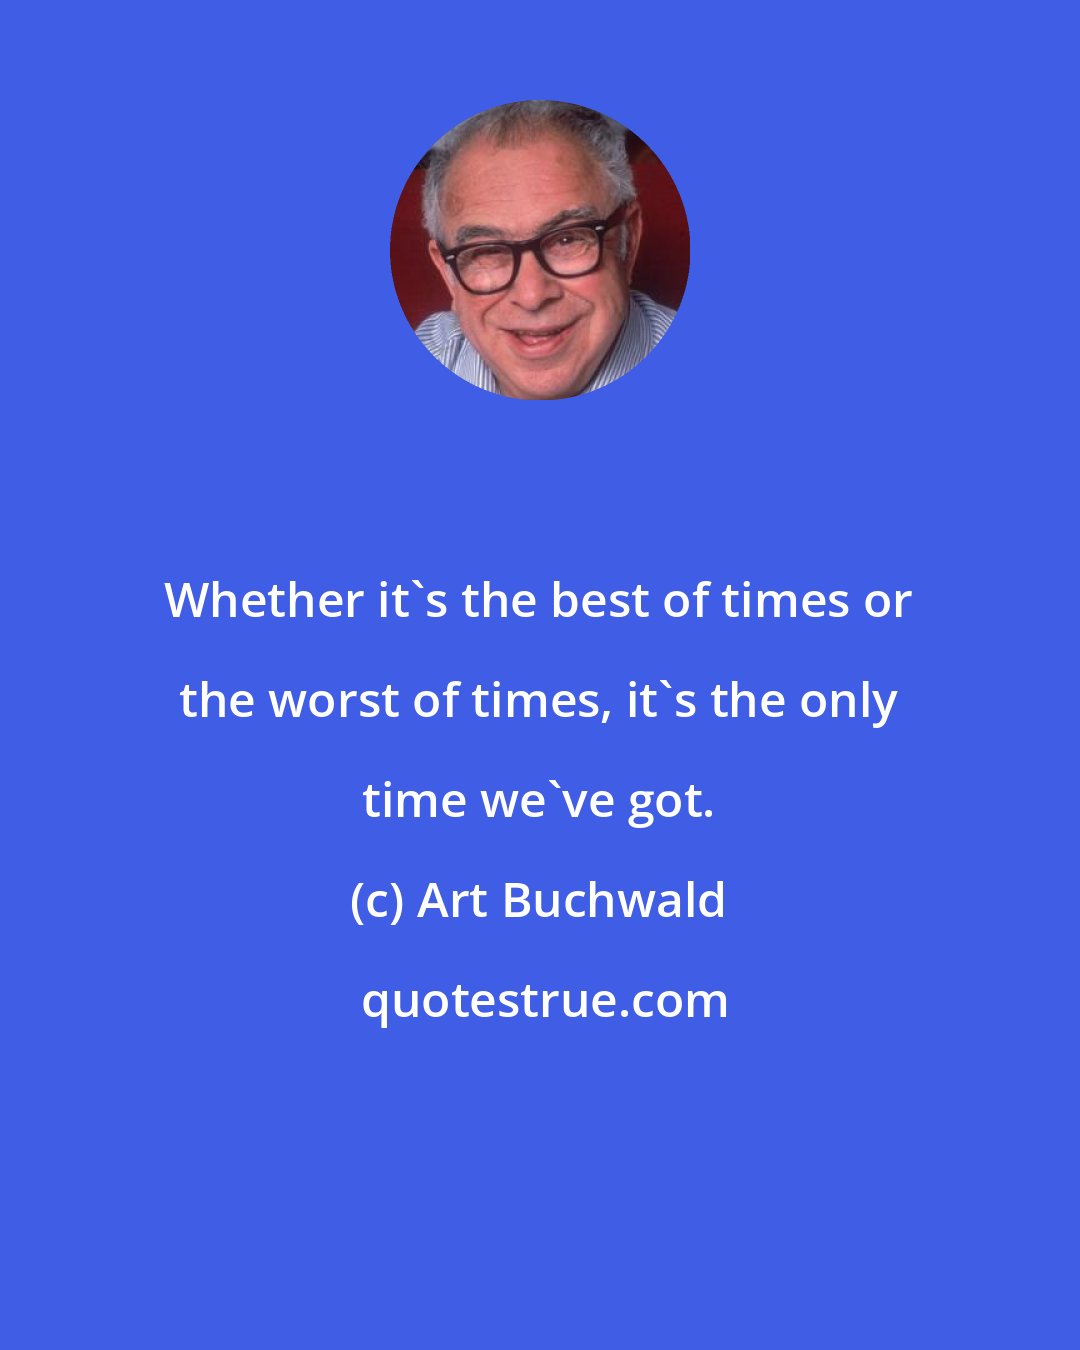 Art Buchwald: Whether it's the best of times or the worst of times, it's the only time we've got.